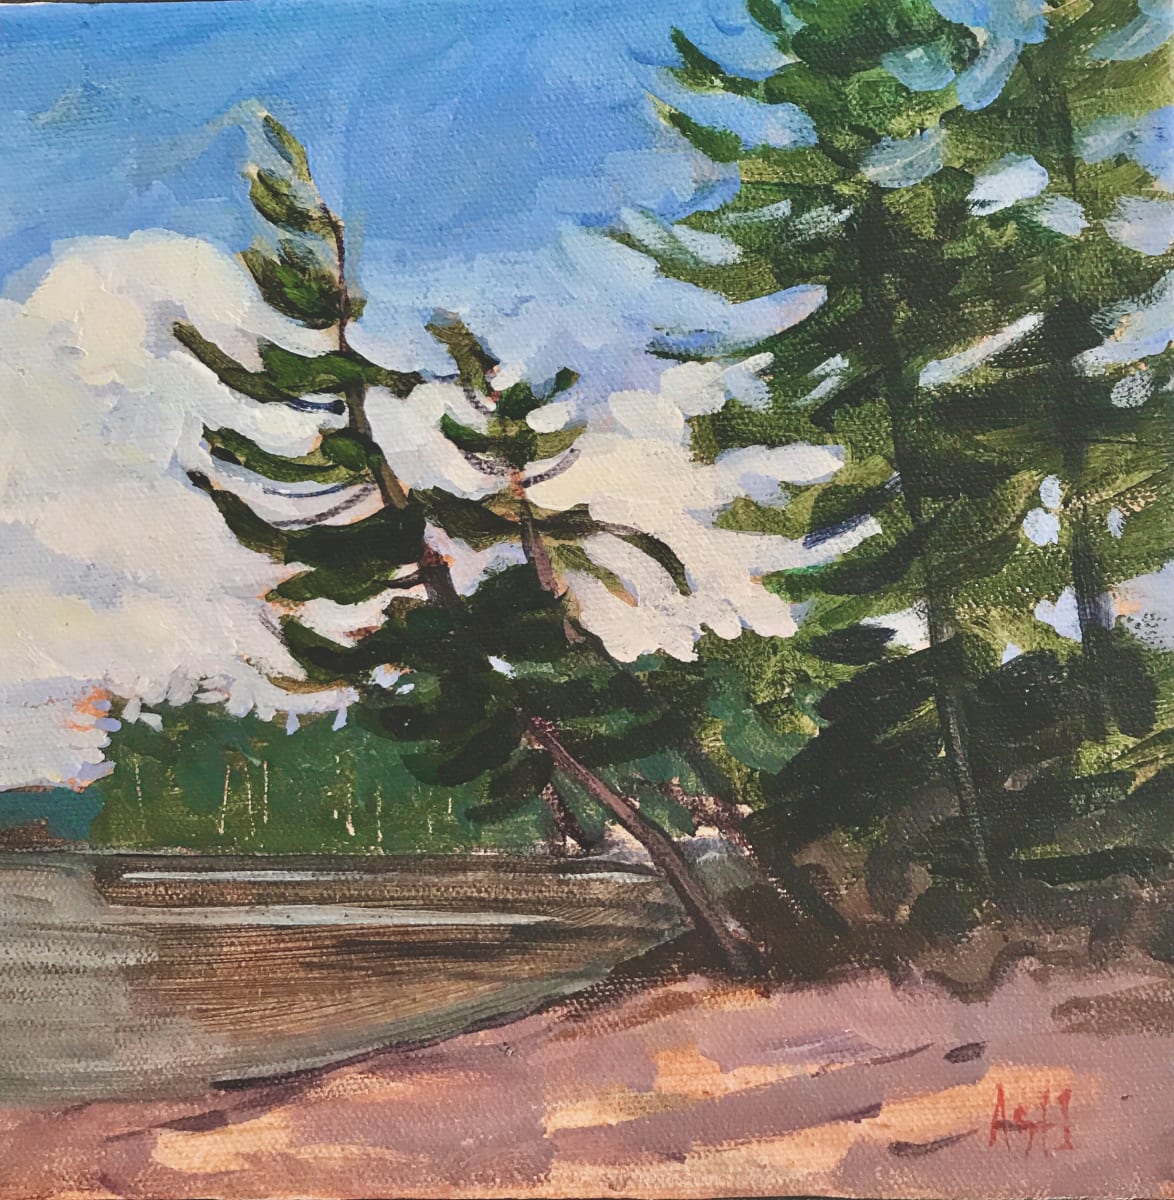 Sand Point, Leaning Pine by Angela St Jean  Image: Plein air piece painted on location. Lark St Patrick QC